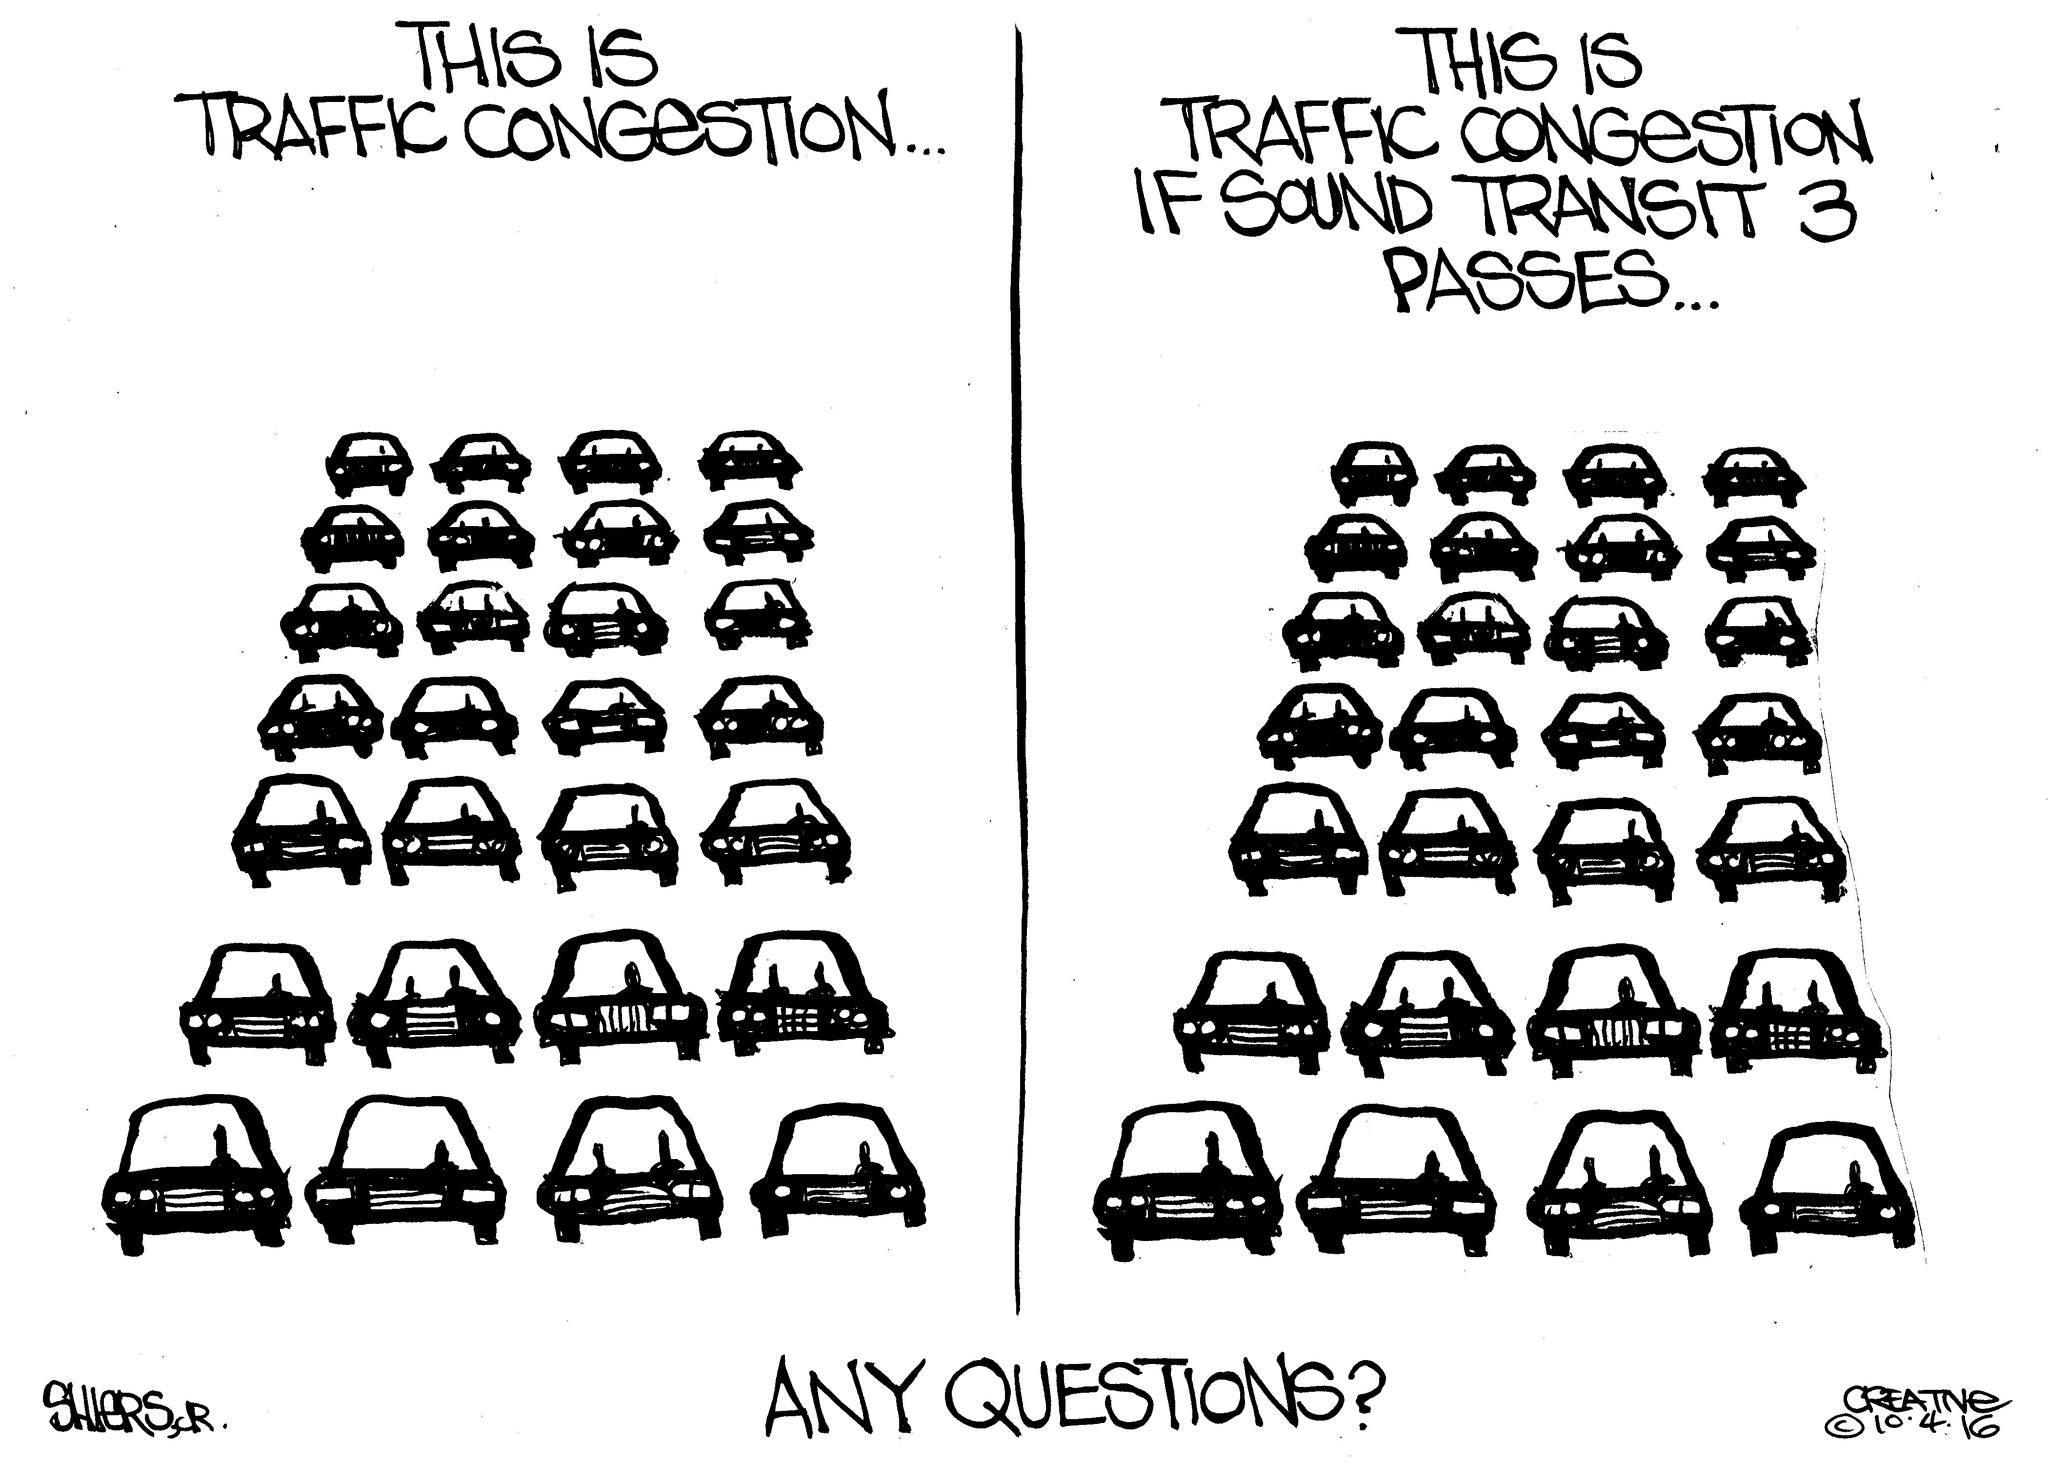 This is traffic congestion | Cartoon for Oct. 5 - Frank Shiers